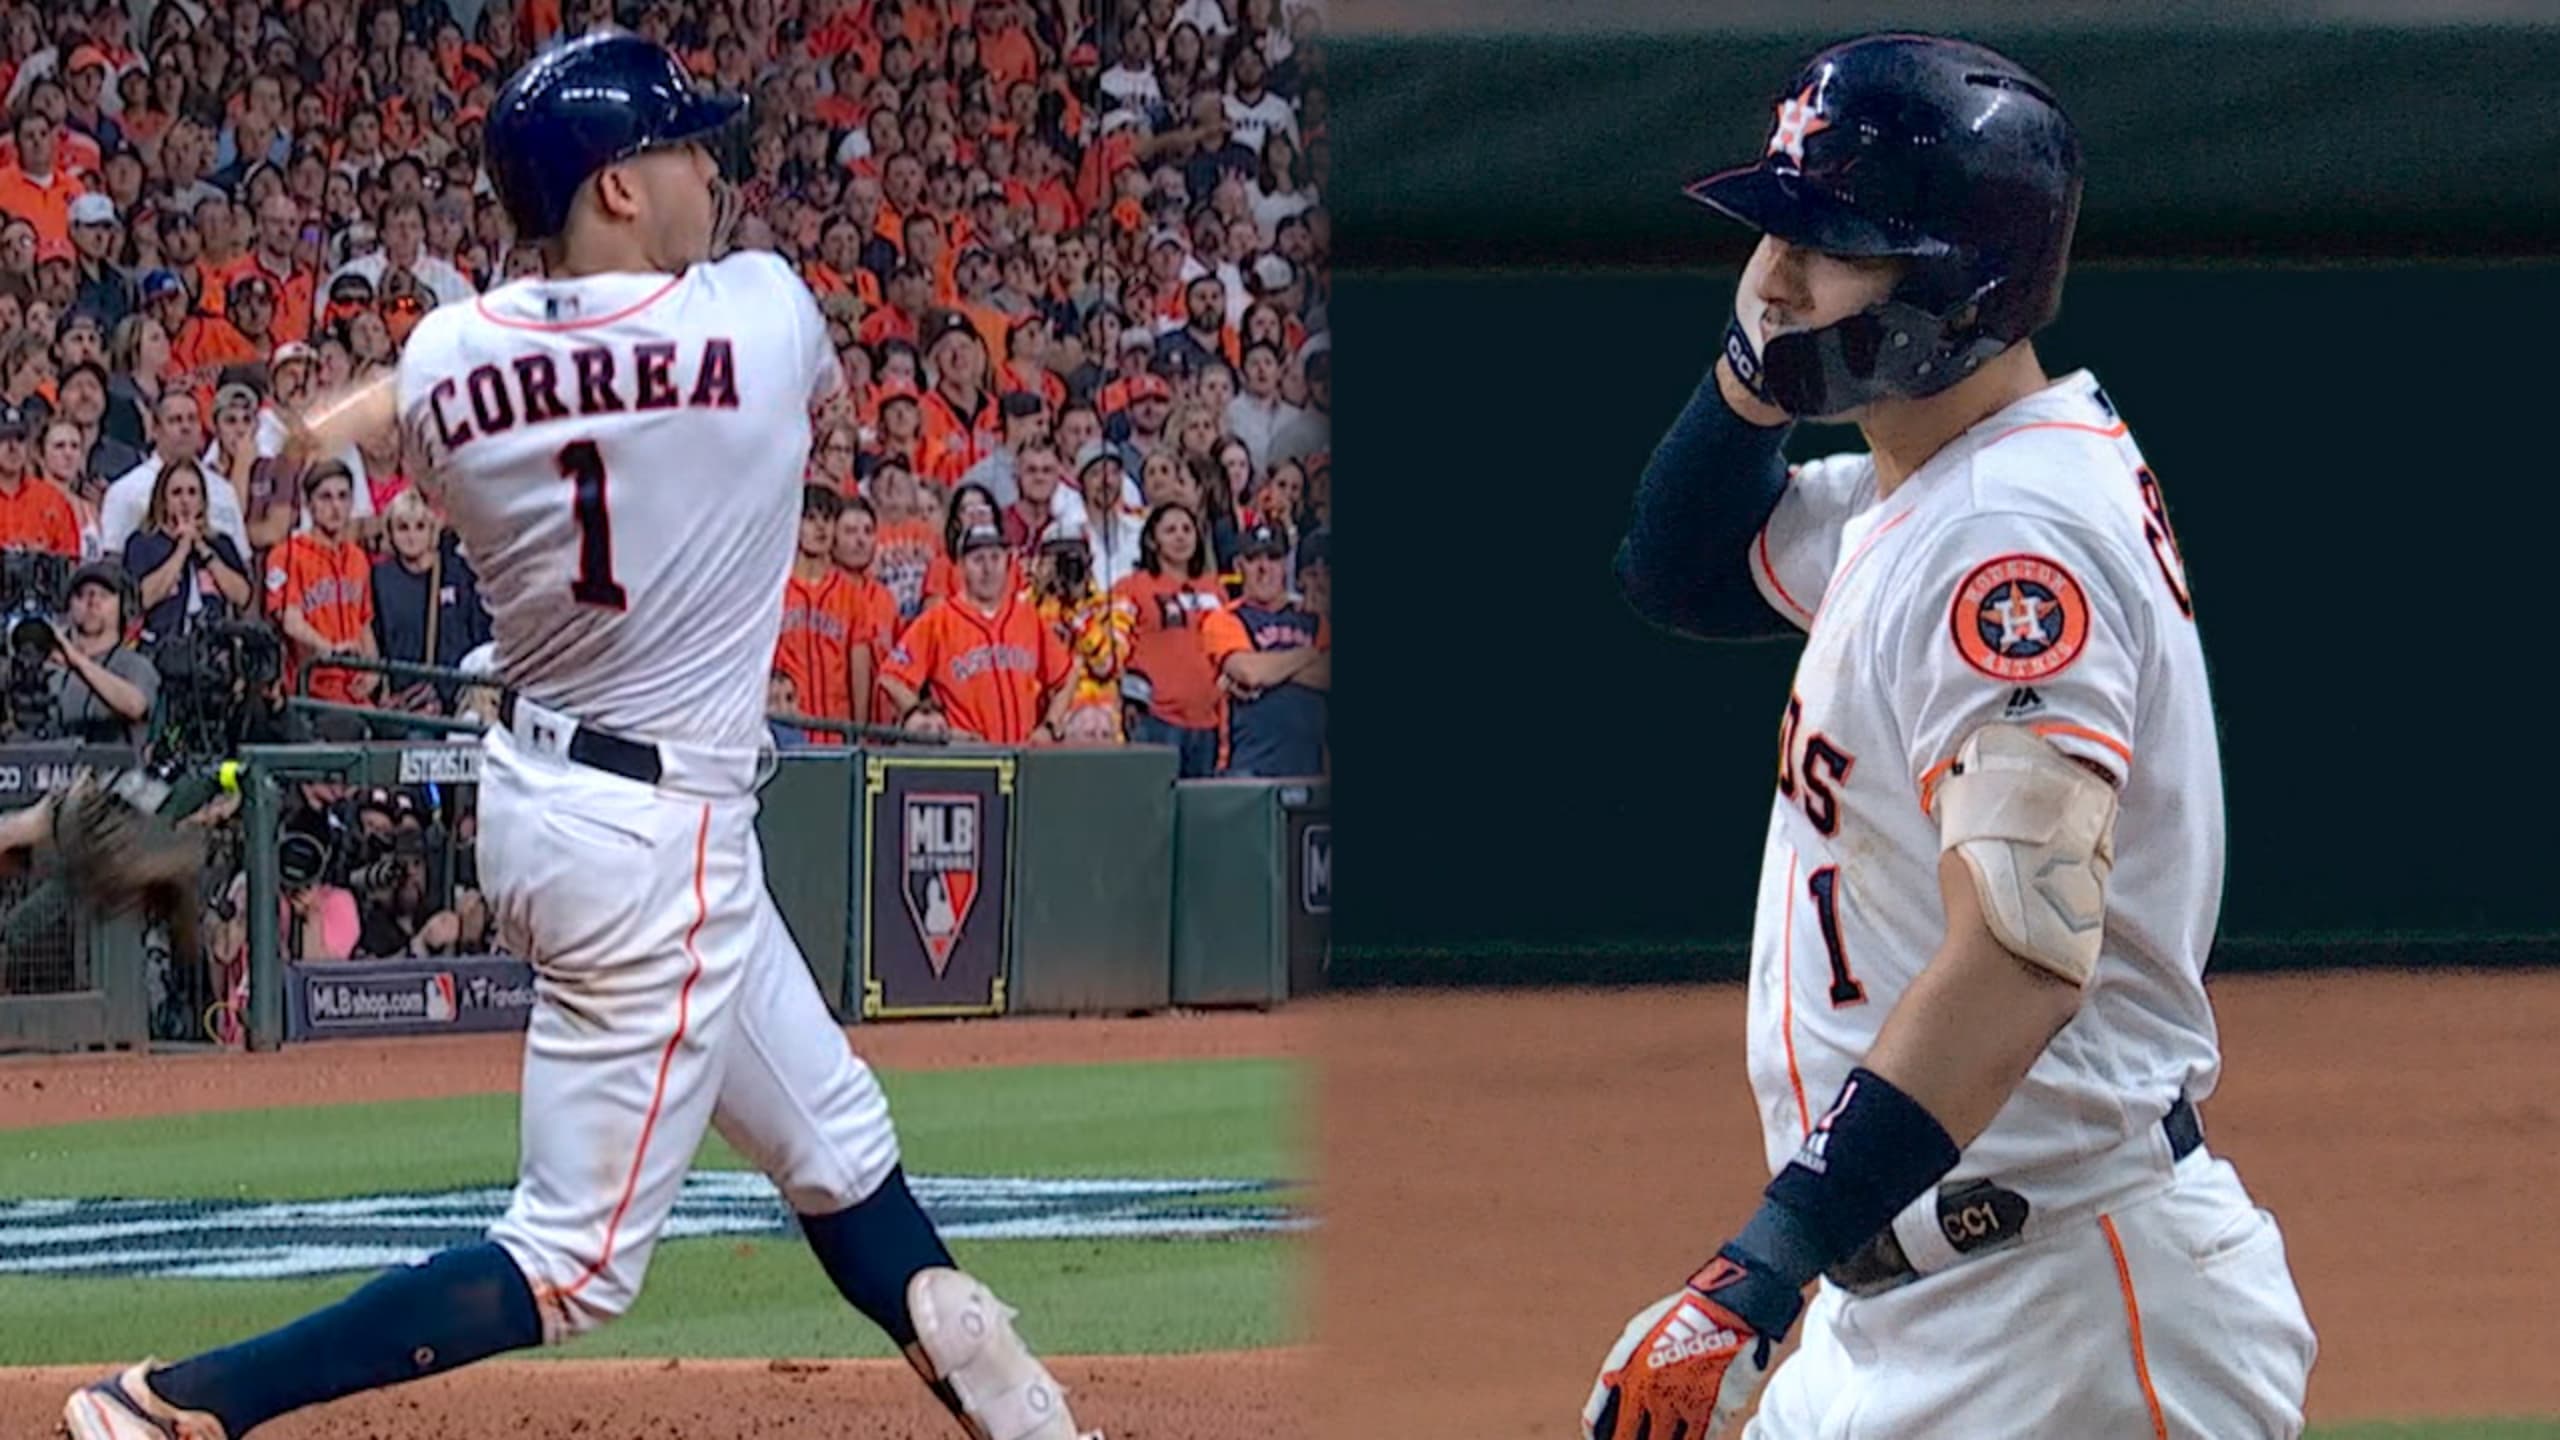 Carlos Correa wins Game 2 with walk-off home run, does basketball  celebration